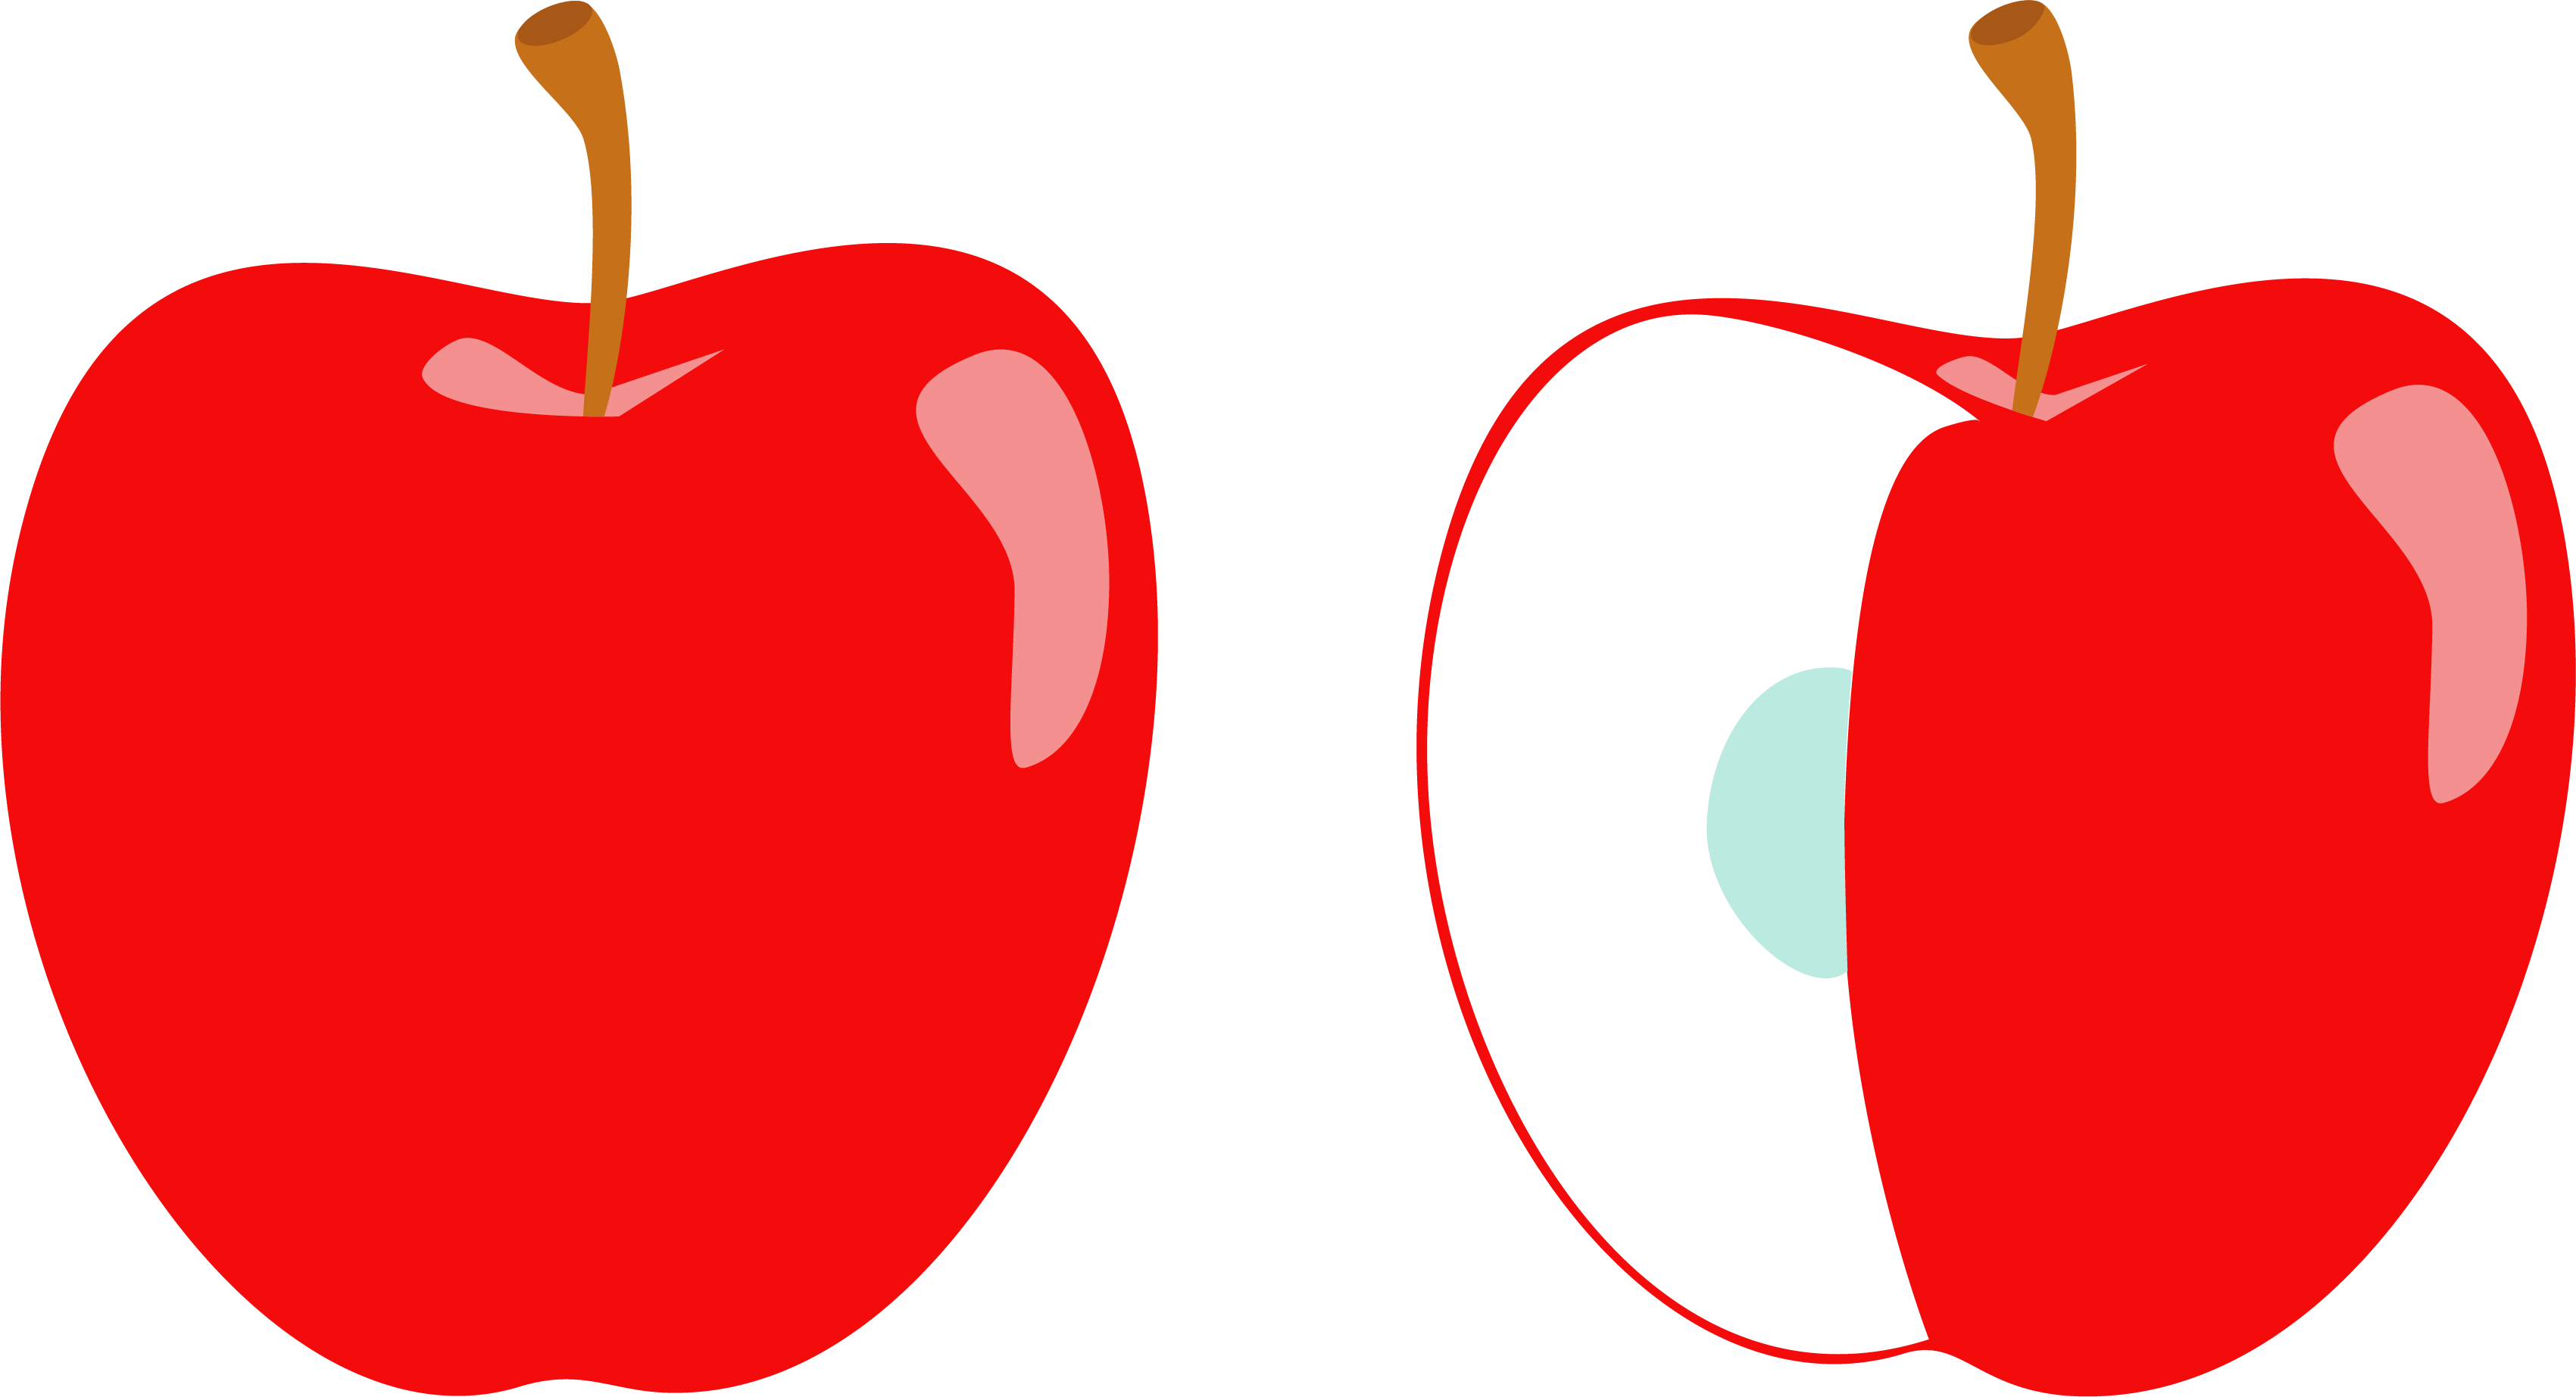 Apples To Apples: Compare Your Fundraising Performance With Benchmarks 5202